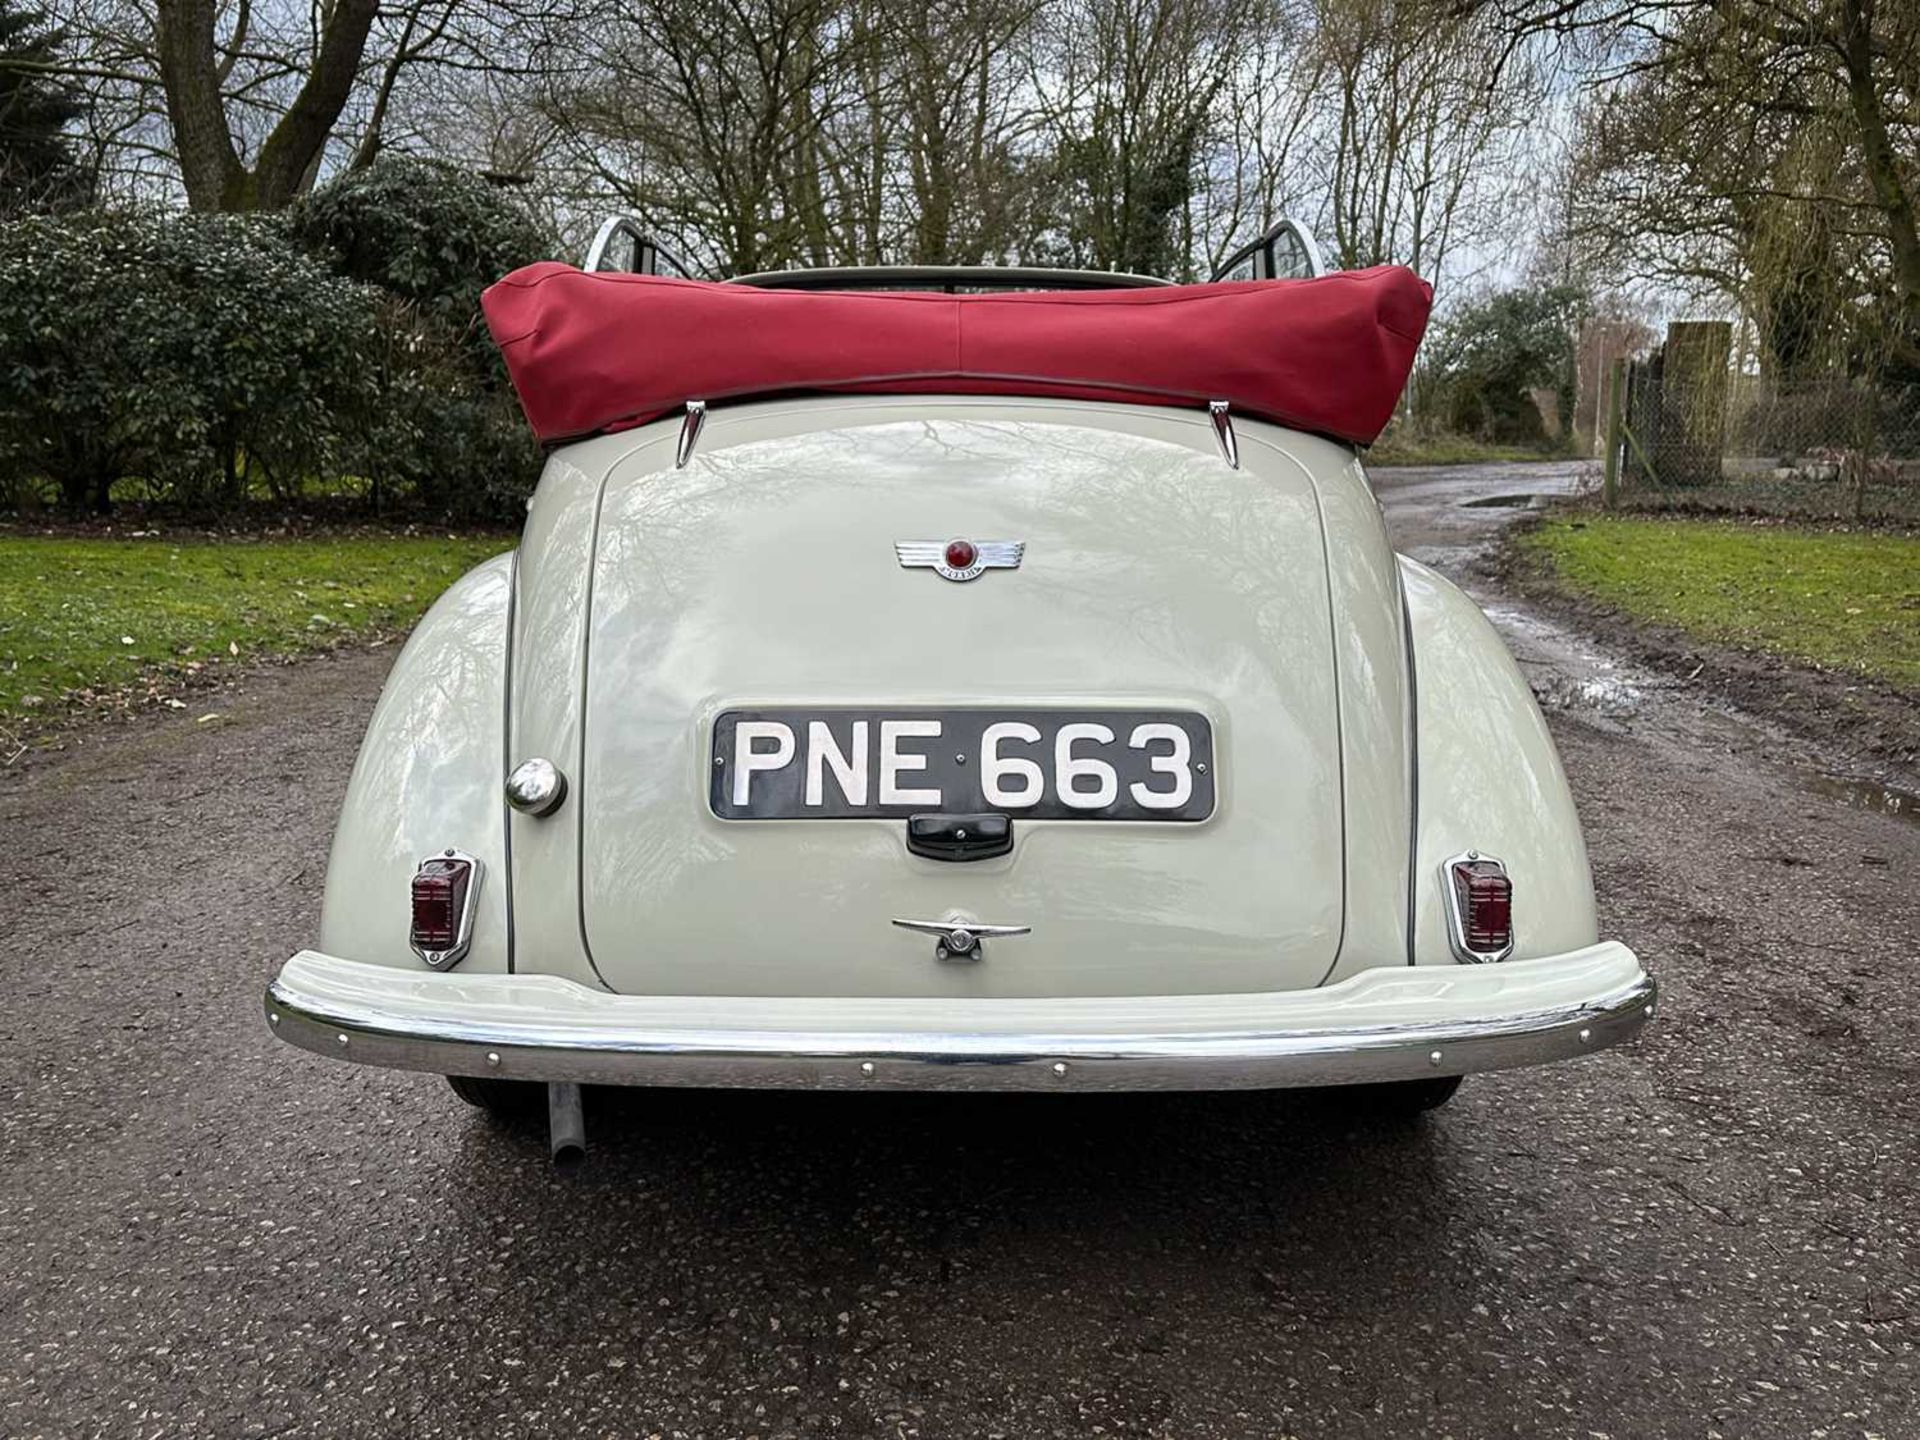 1954 Morris Minor Tourer Fully restored to concours standard - Image 20 of 100